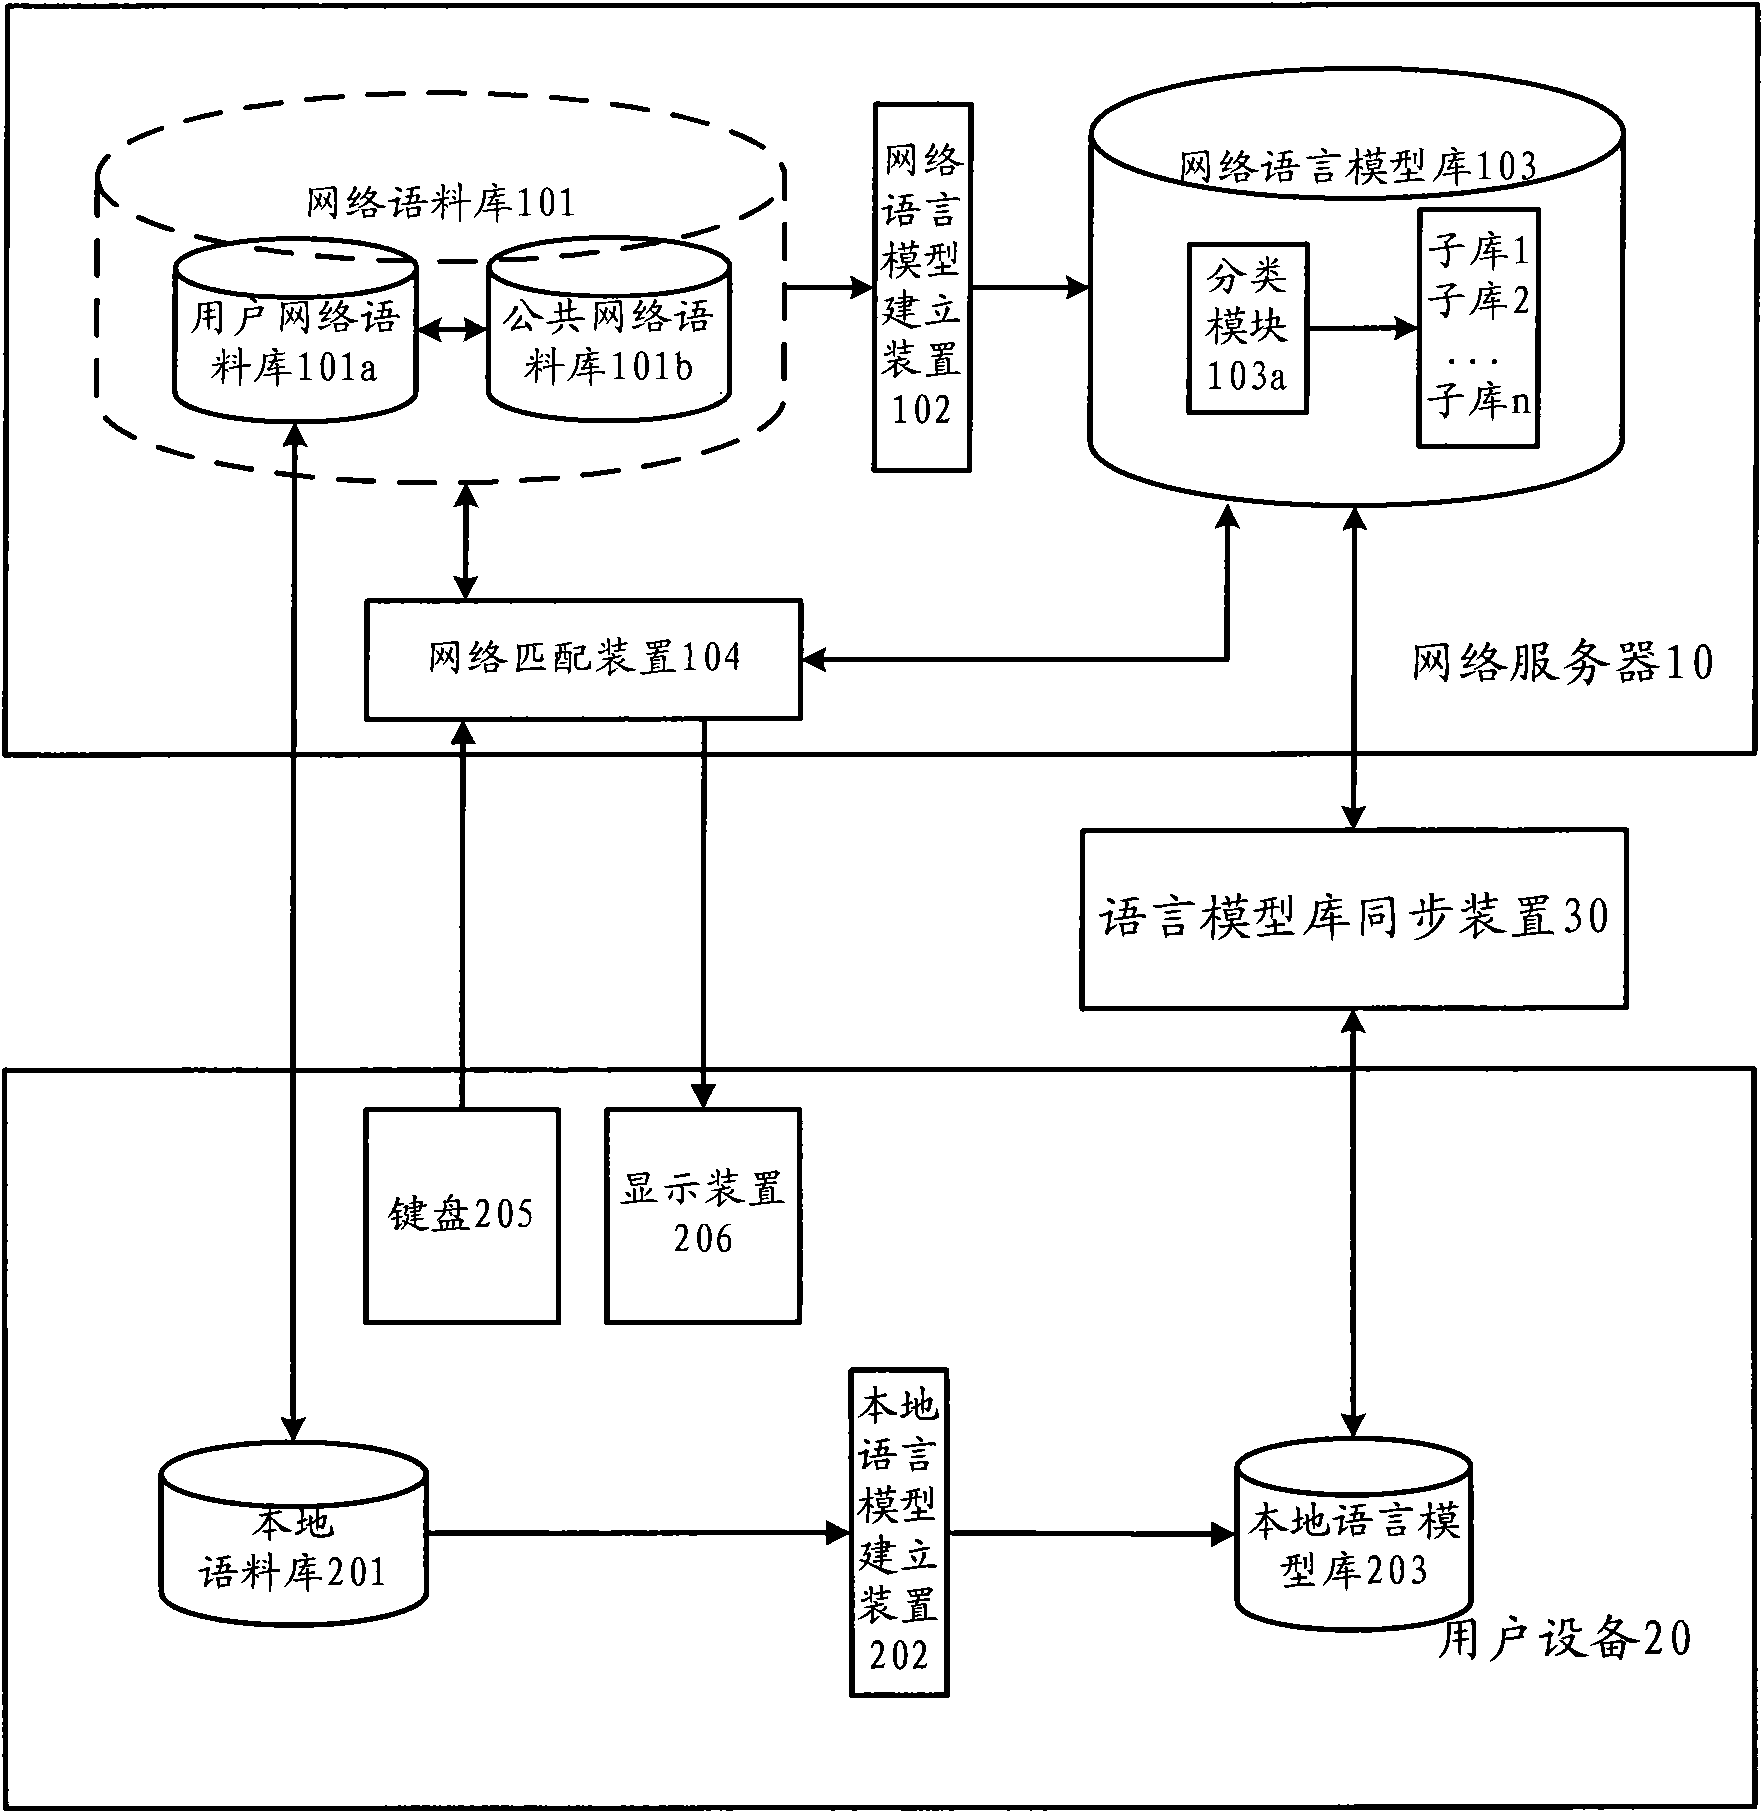 Method for maintaining language model base by using network and system